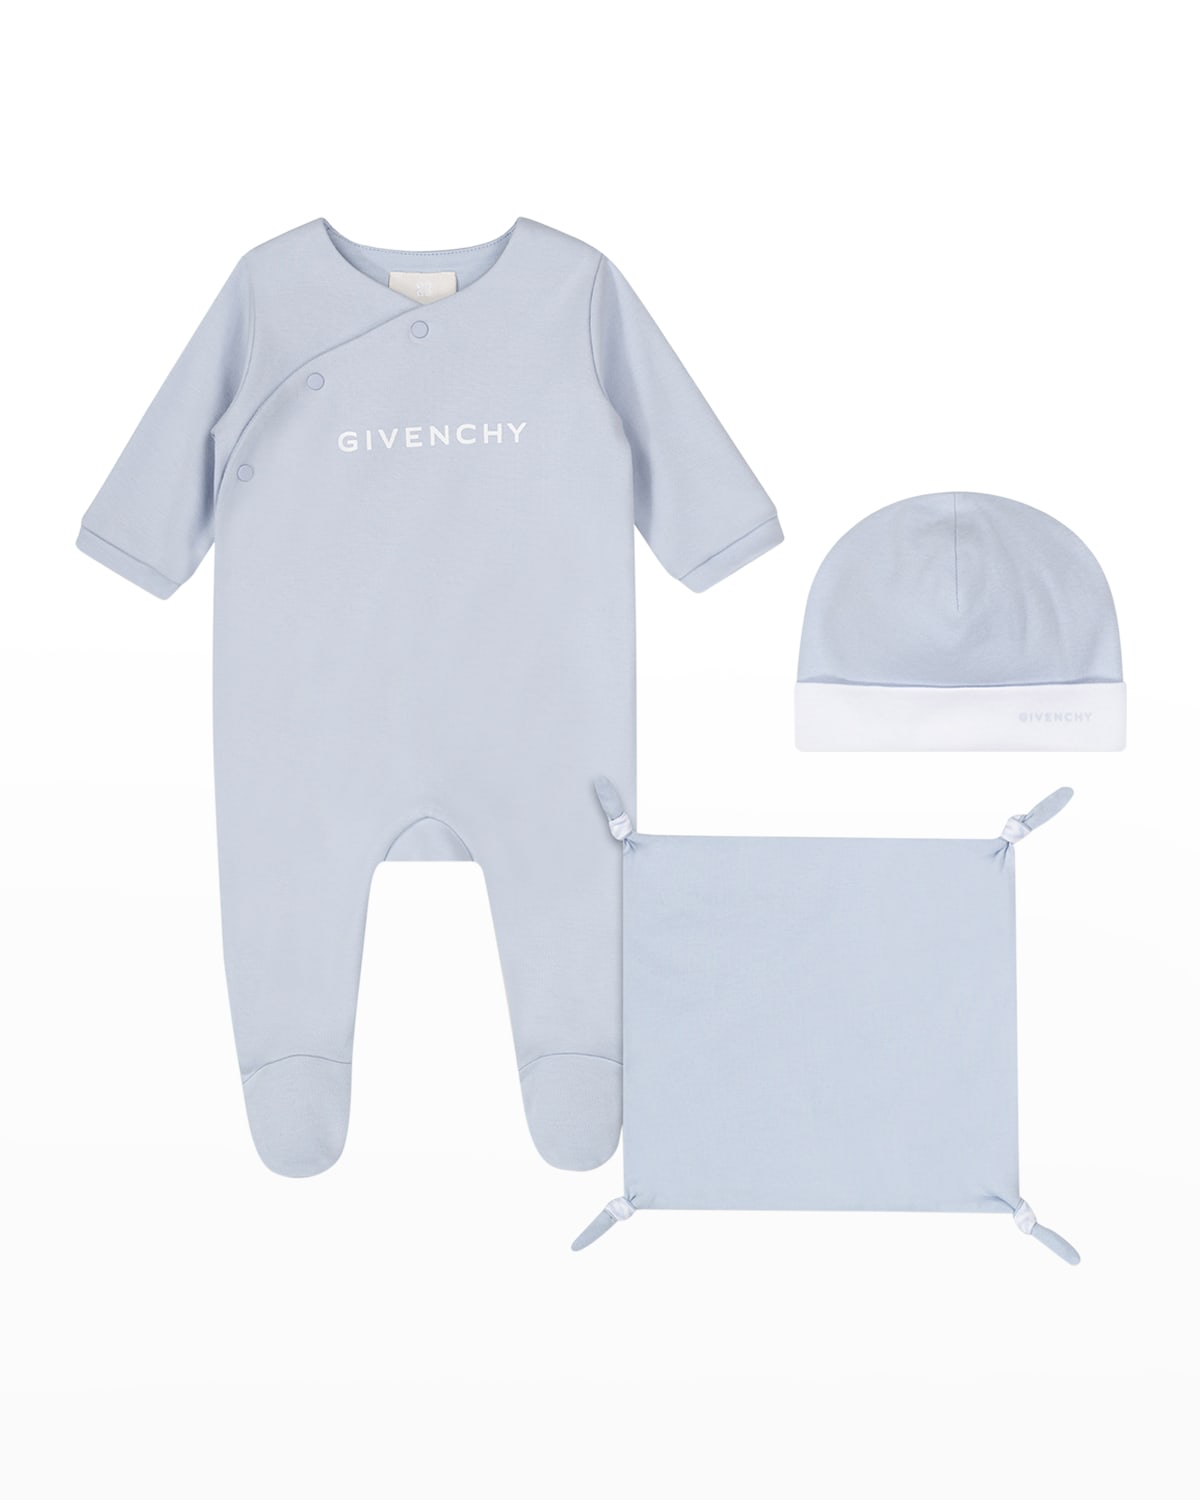 Givenchy Kid's 3-piece Gift Set In Pale Blue